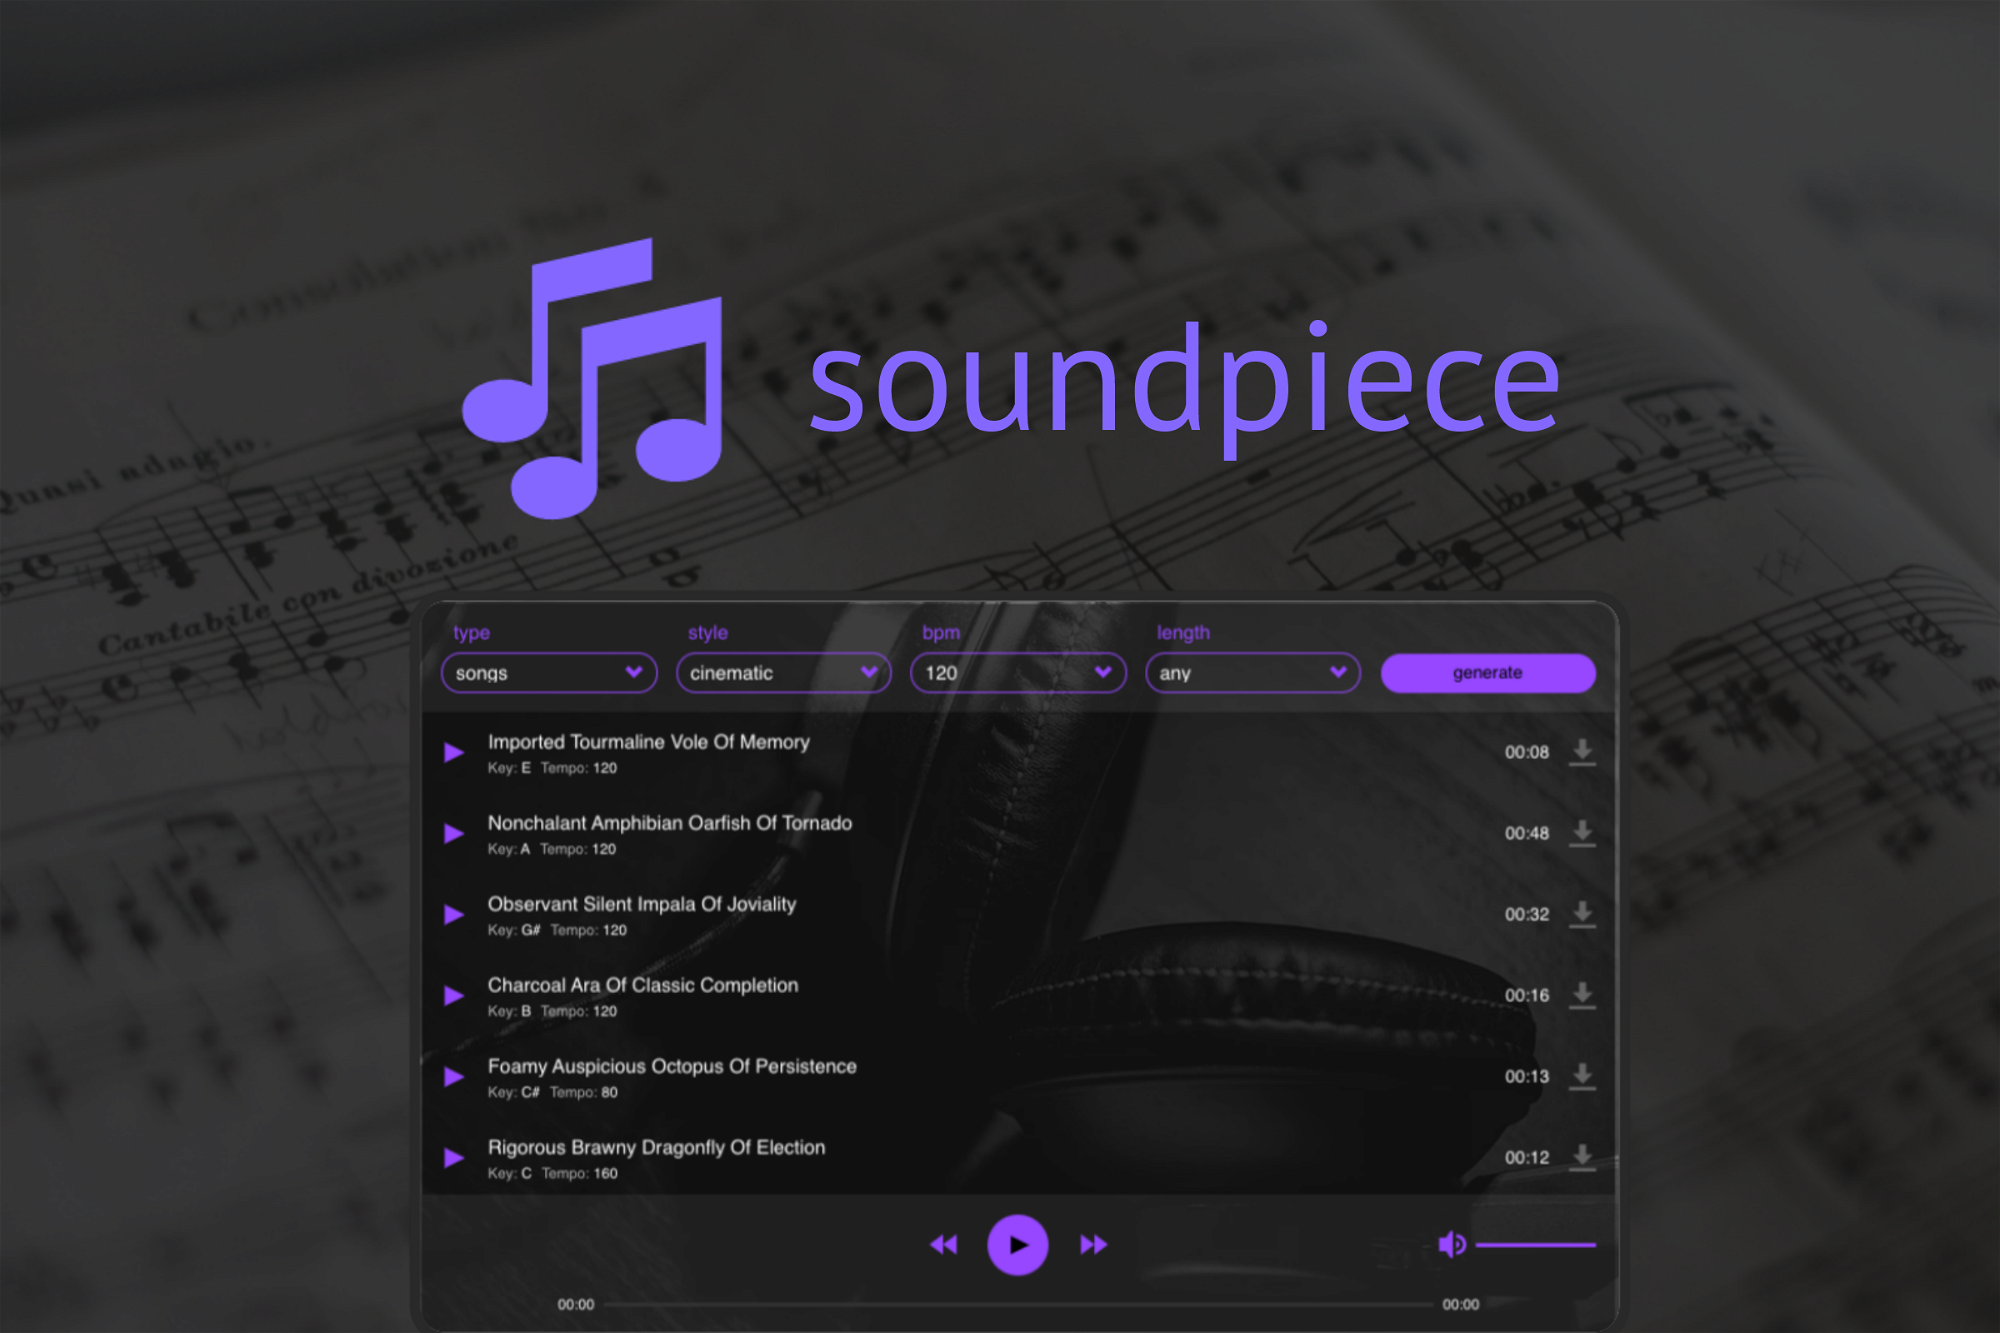 AppSumo Deal for soundpiece